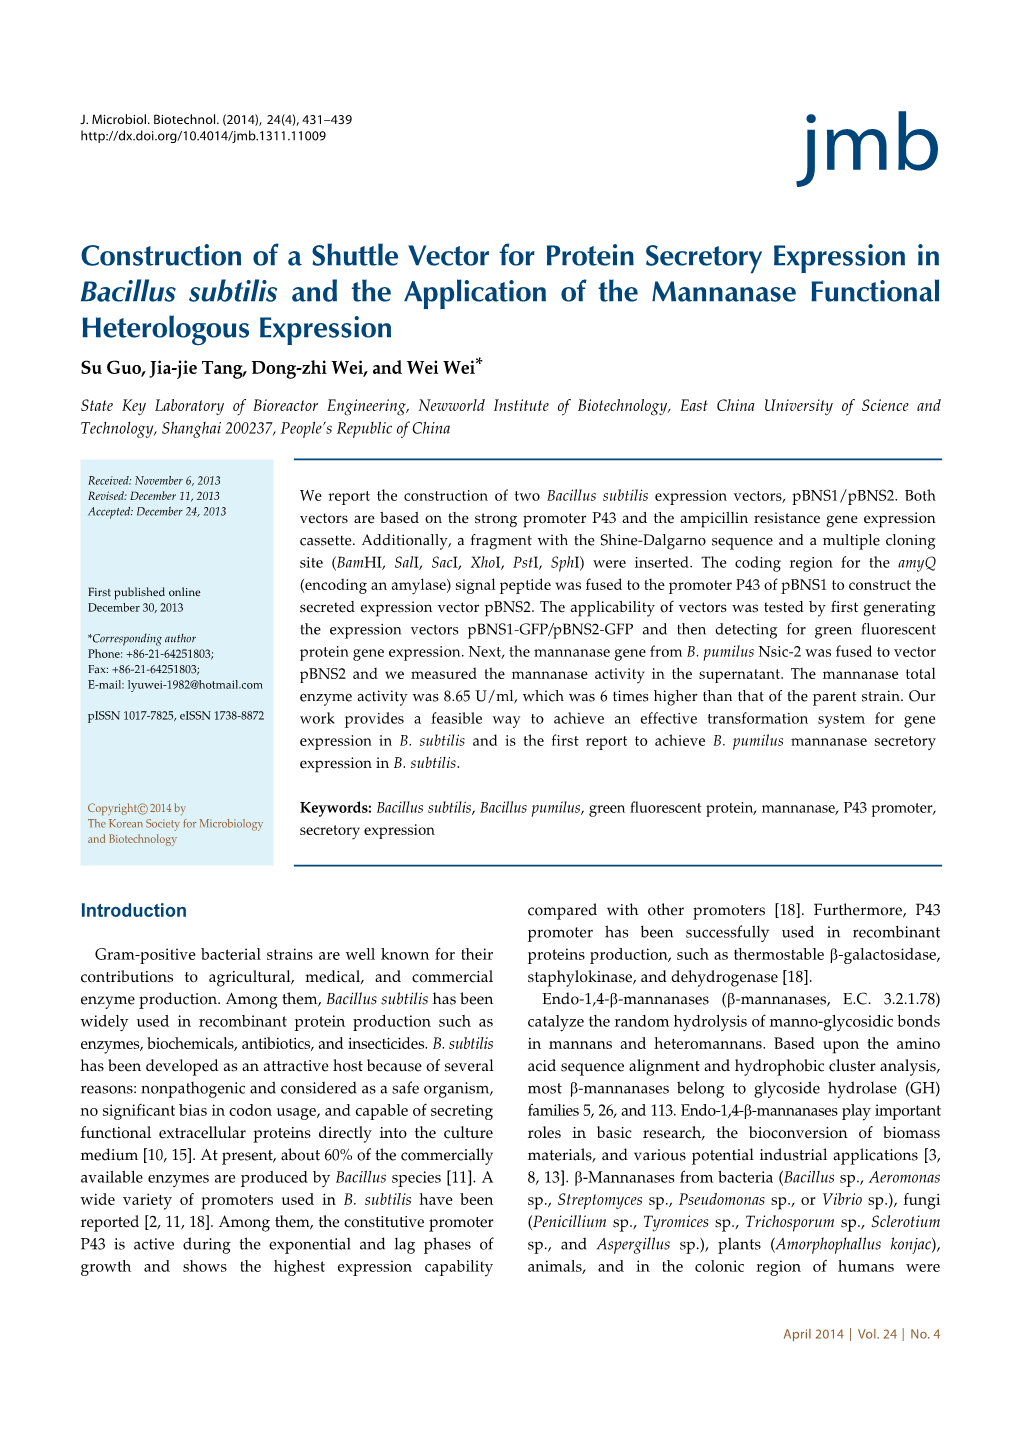 Construction of a Shuttle Vector for Protein Secretory Expression in Bacillus Subtilis and the Application of the Mannanase Func